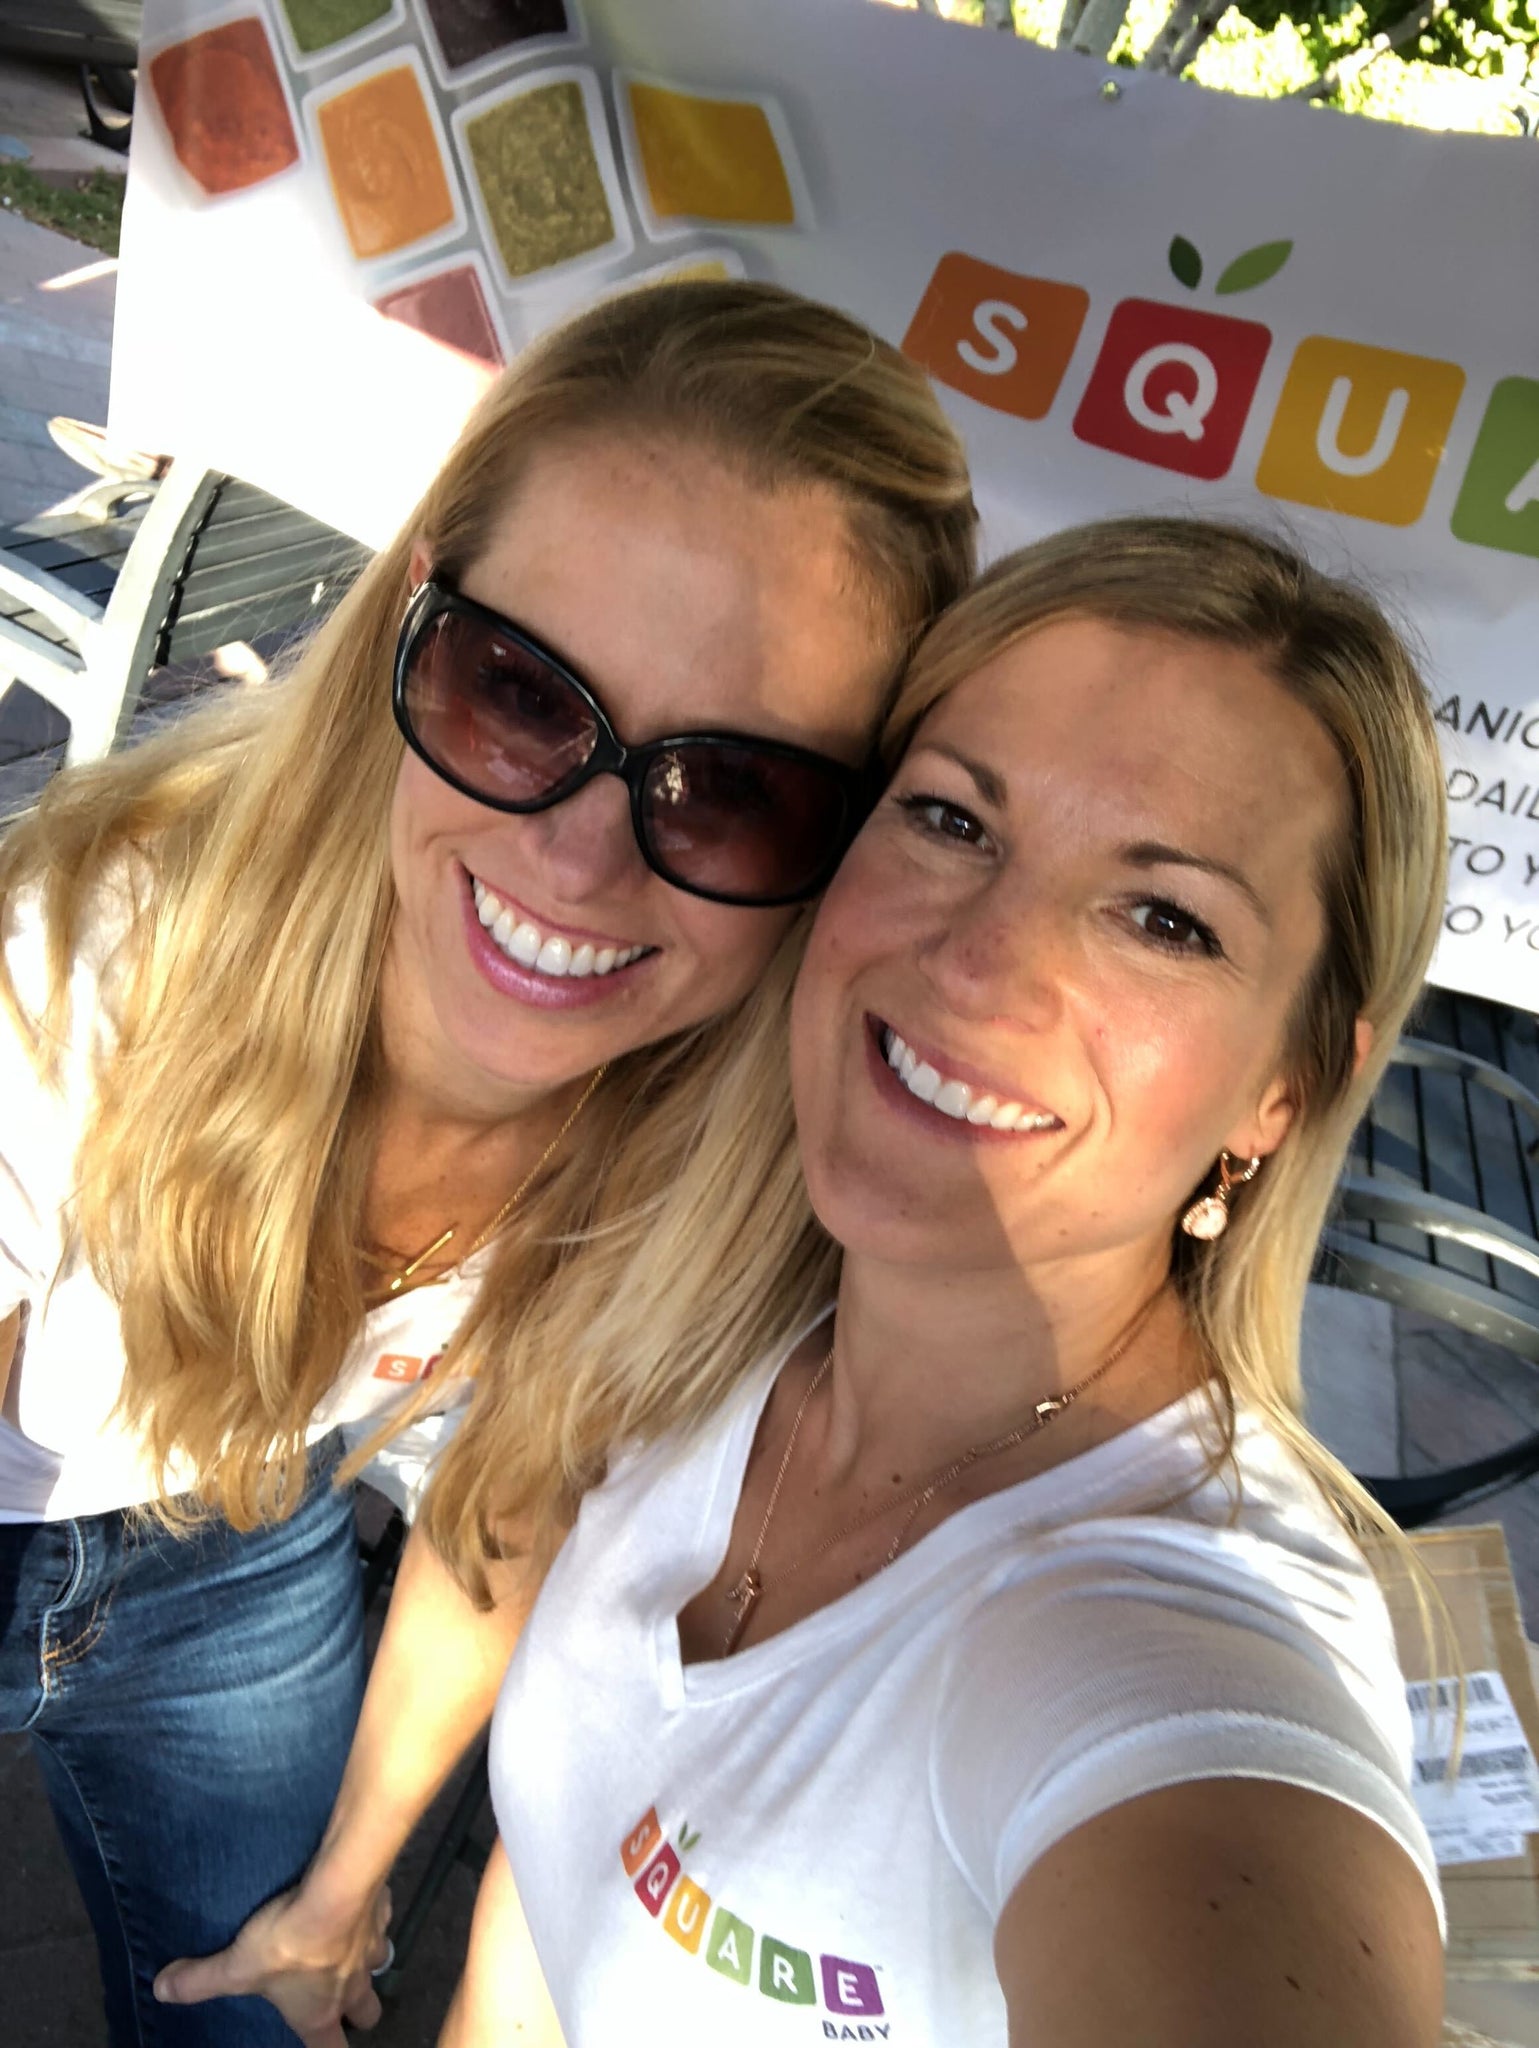 Founders of Square Baby Kendall Glynn and Katie Thomson